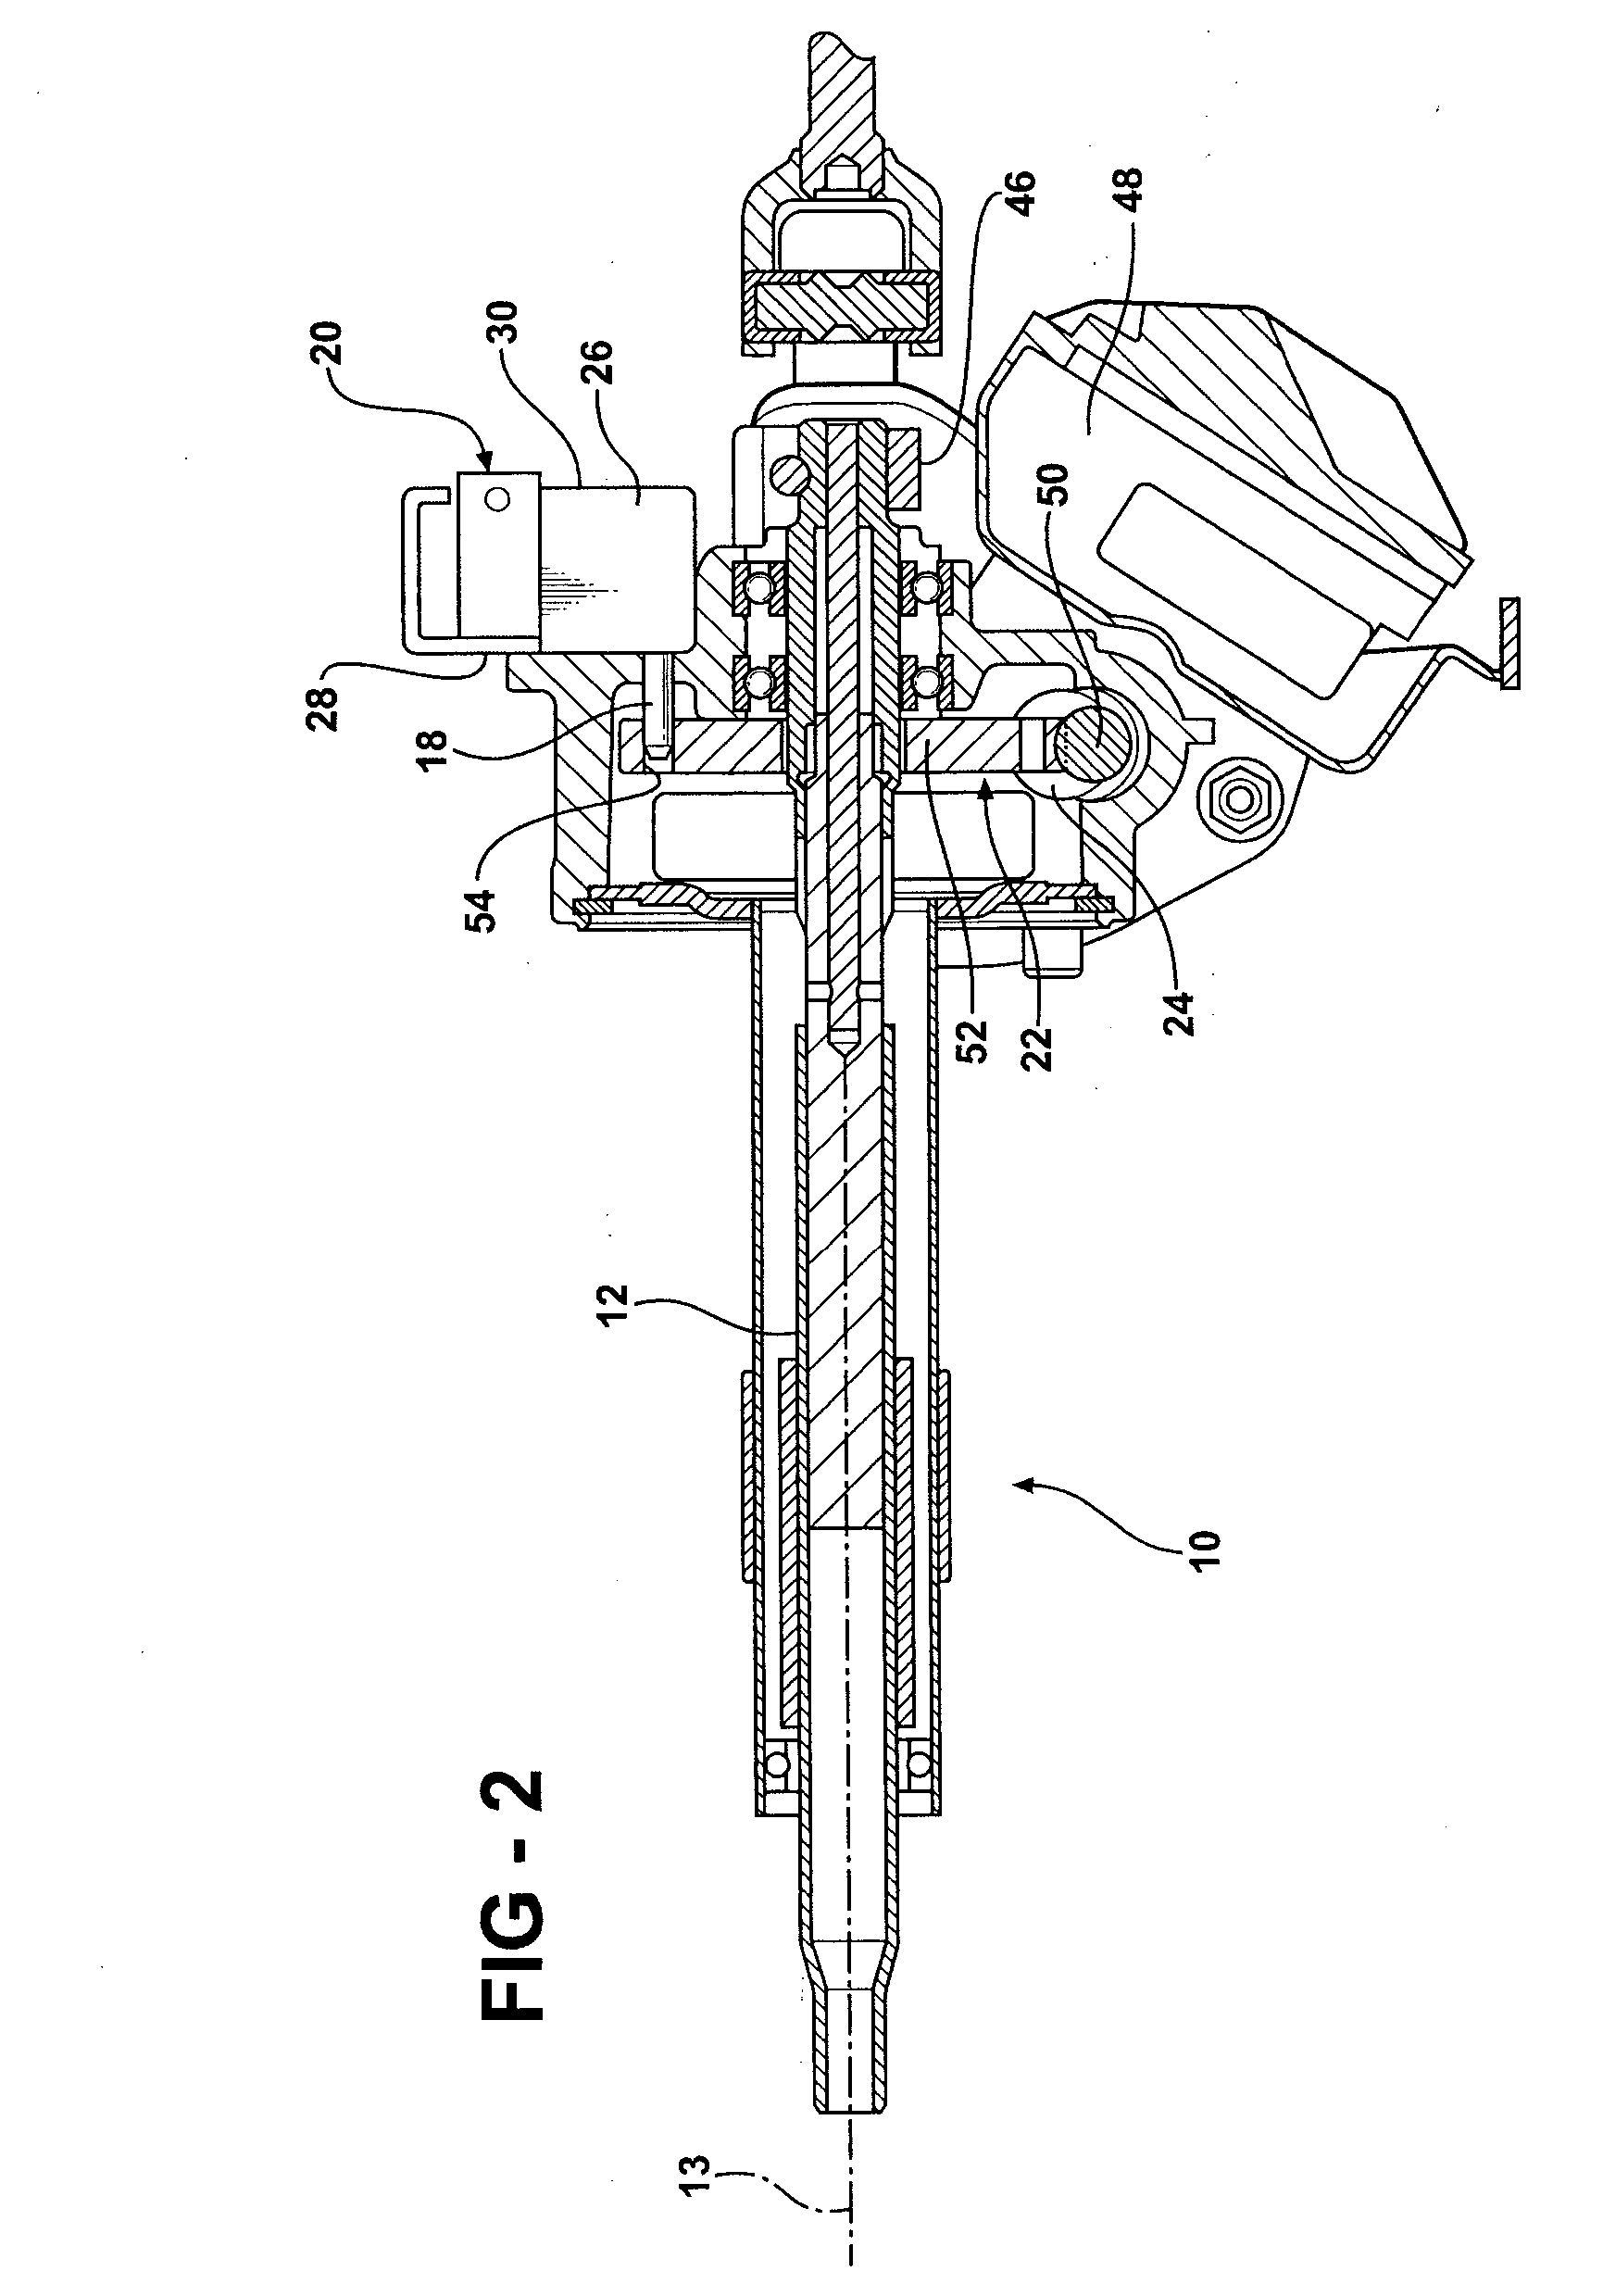 Column assembly of a vehicle having a steering column to be locked and unlocked